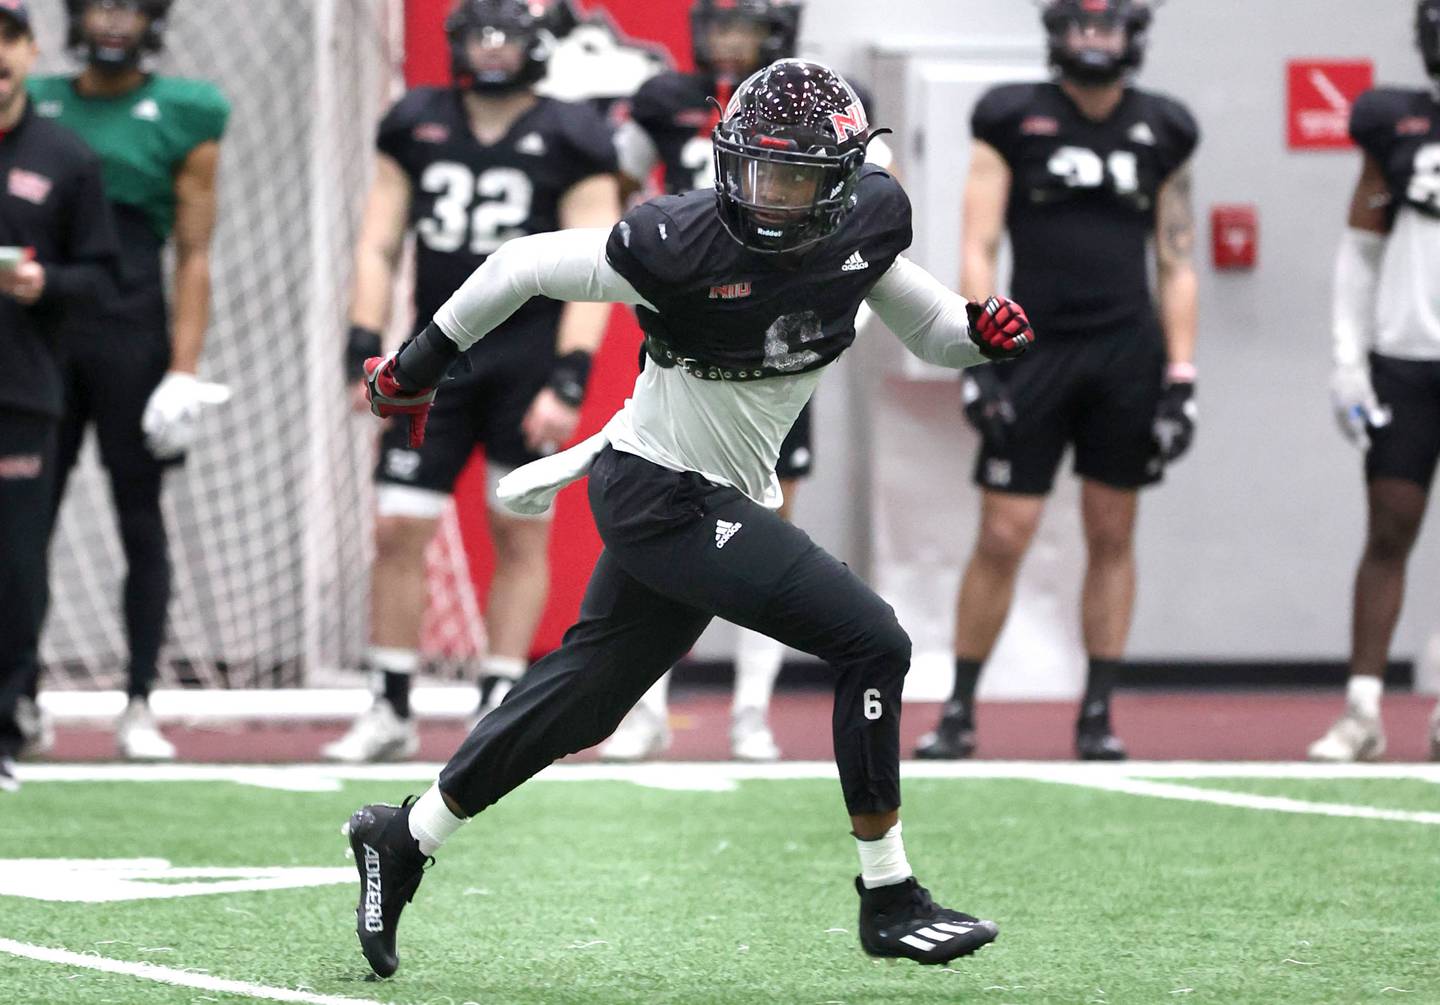 Northern Illinois University safety CJ Brown drops into coverage during spring practice Wednesday, April 6, 2022, in the Chessick Practice Center at NIU in DeKalb.